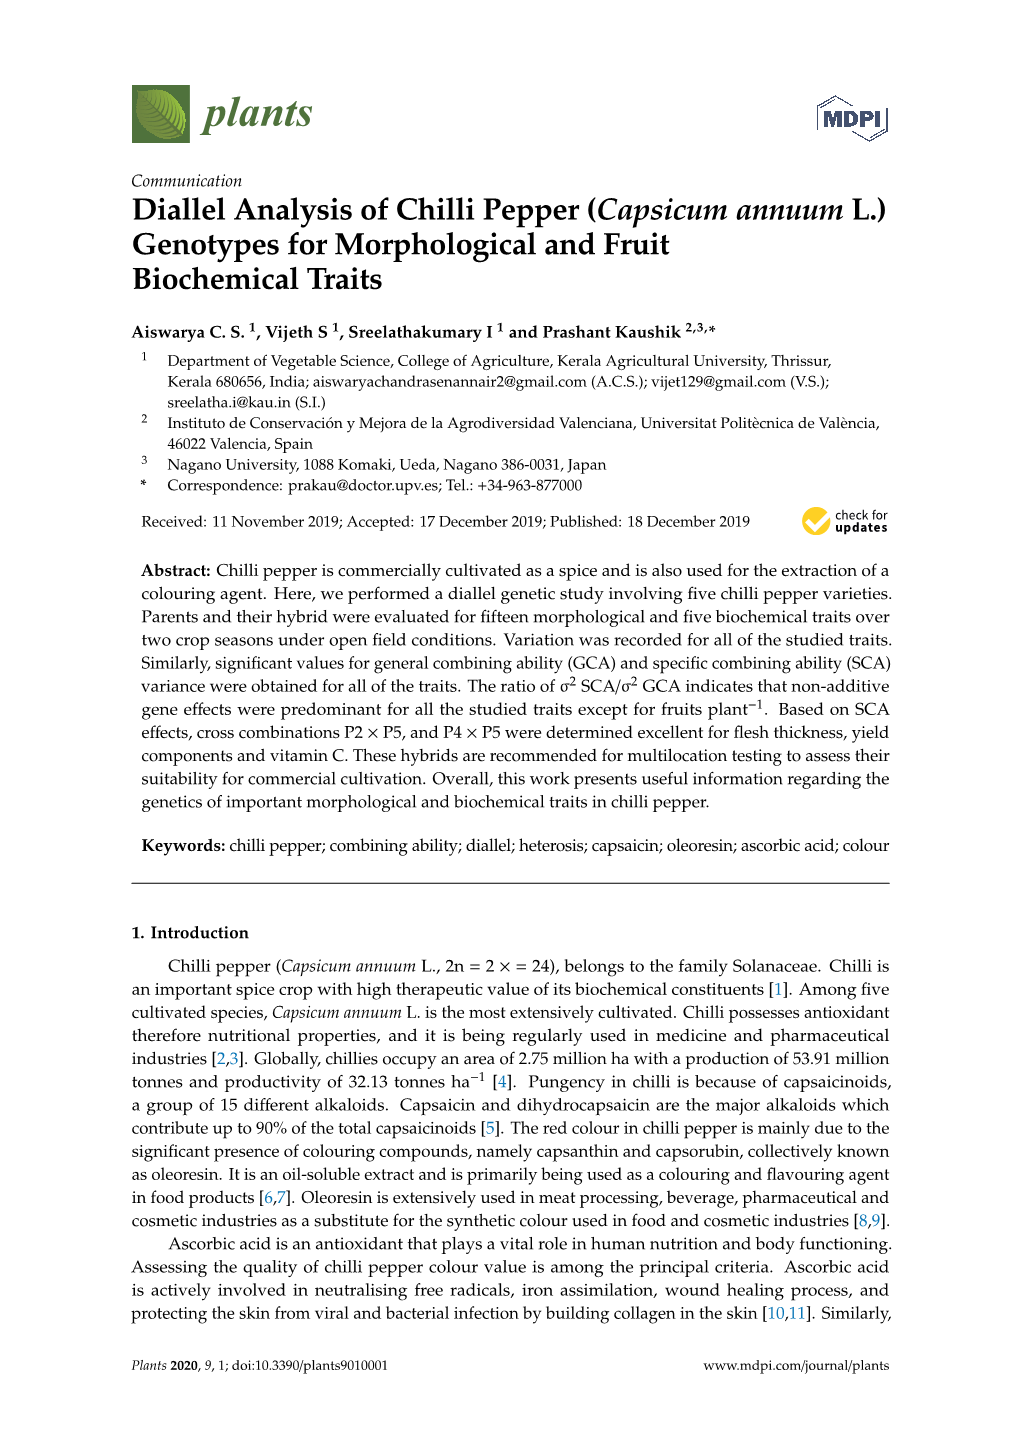 Diallel Analysis of Chilli Pepper (Capsicum Annuum L.) Genotypes for Morphological and Fruit Biochemical Traits